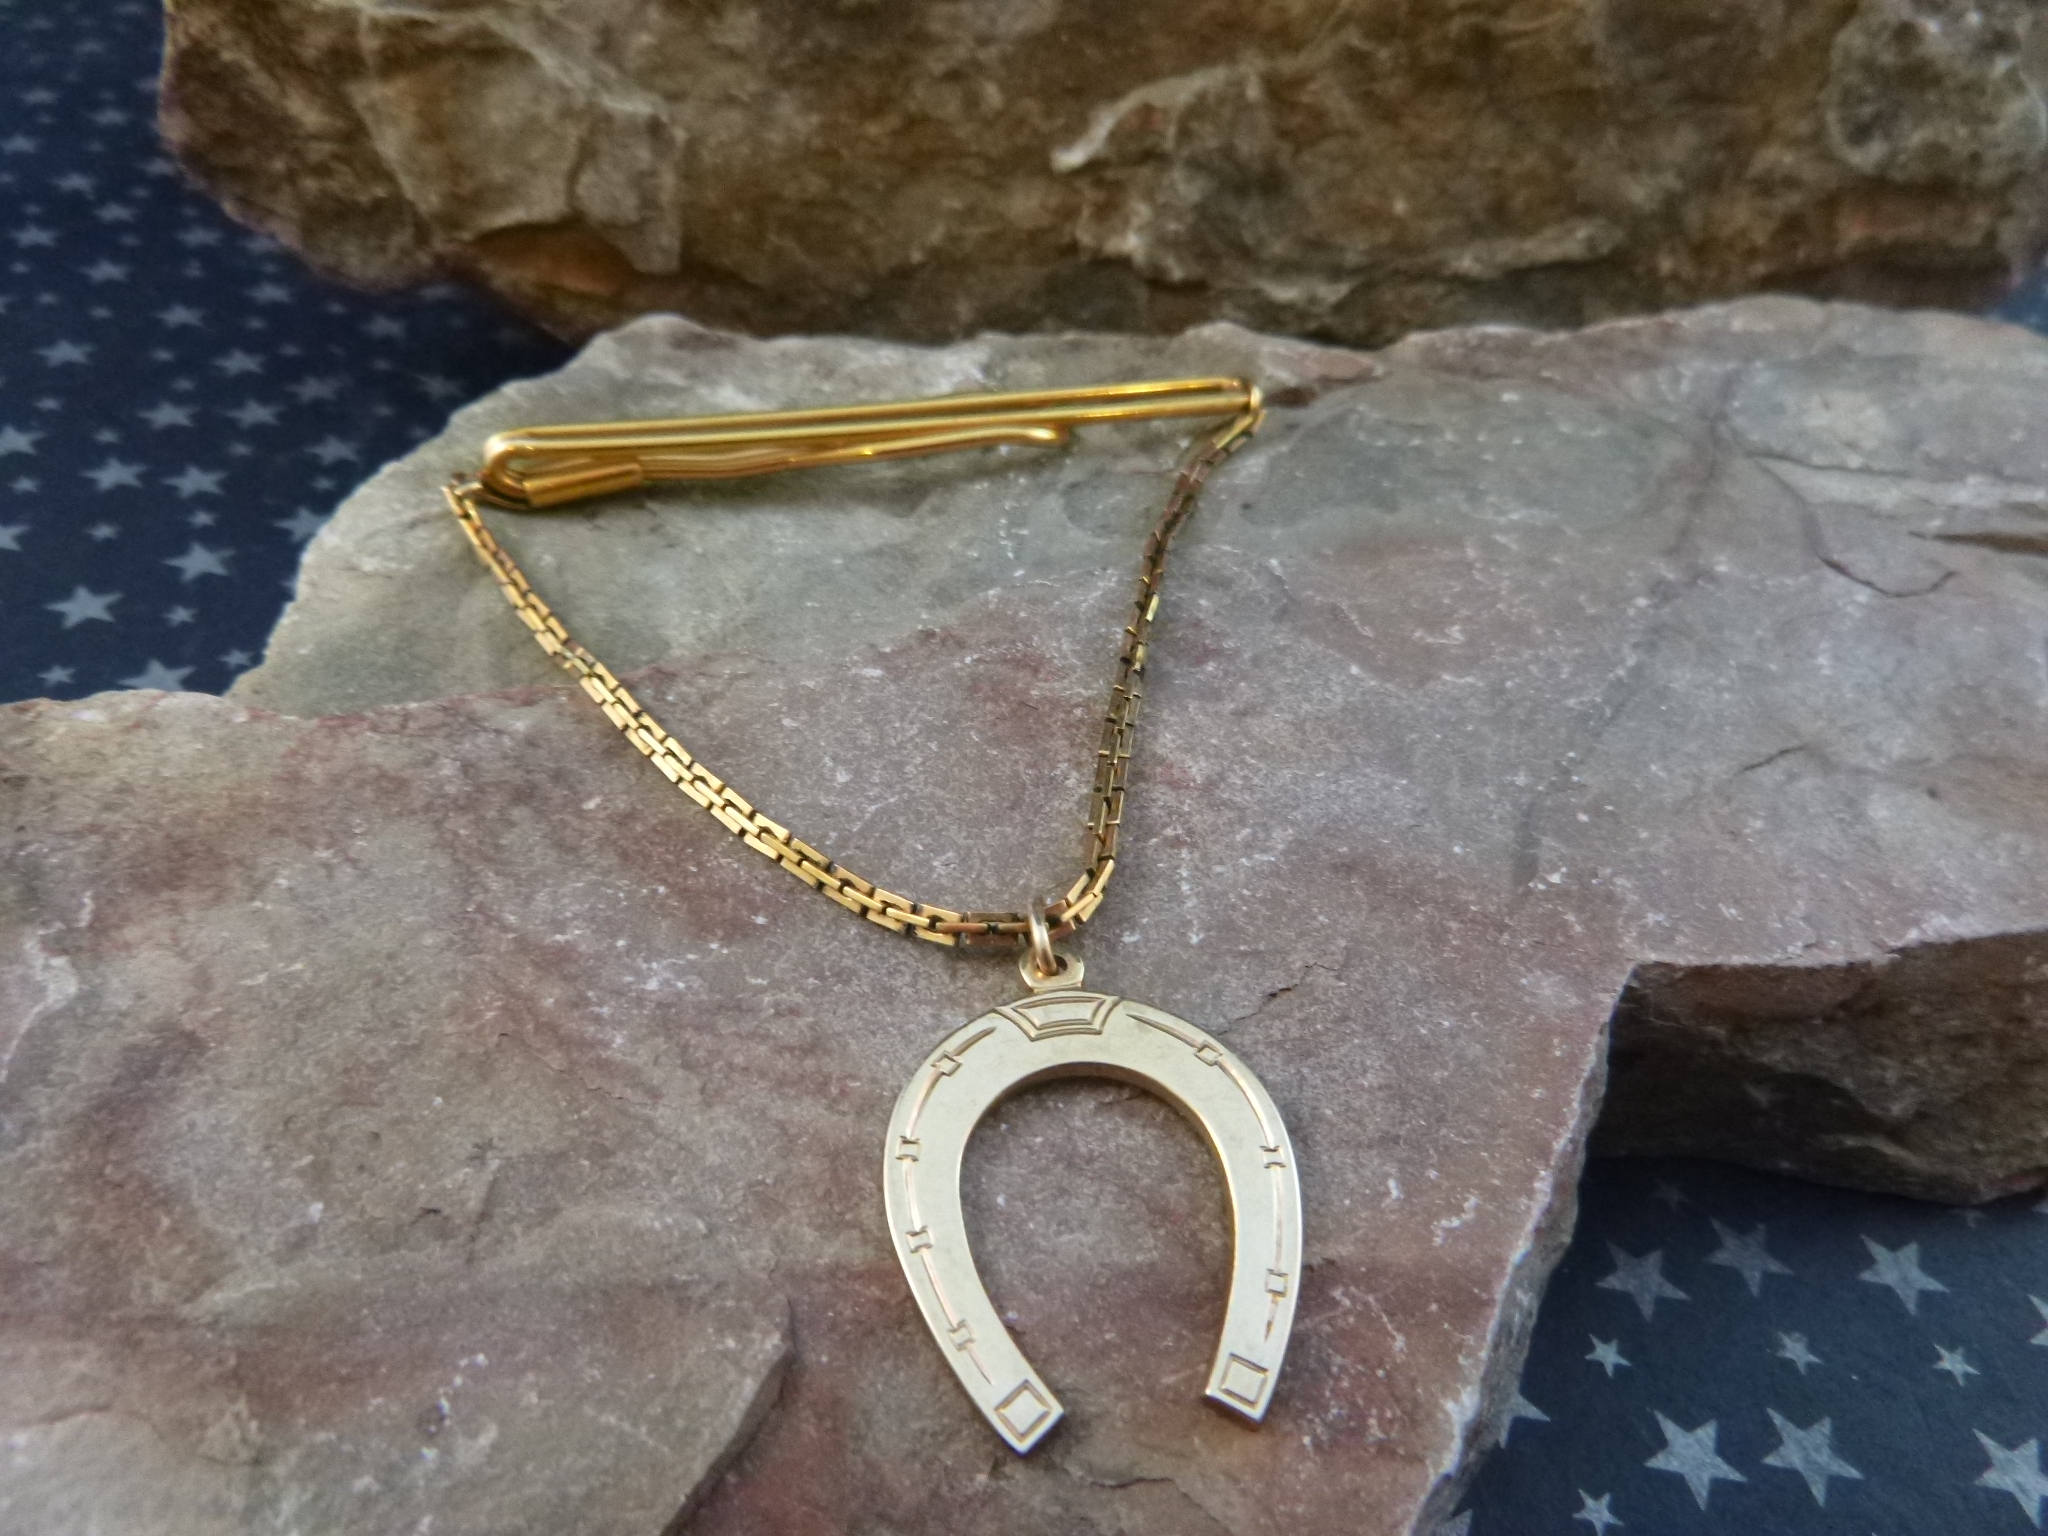 Horseshoe Tie Bar Vintage Swank Tie Clip with Swag Chain | Gold Filled ...